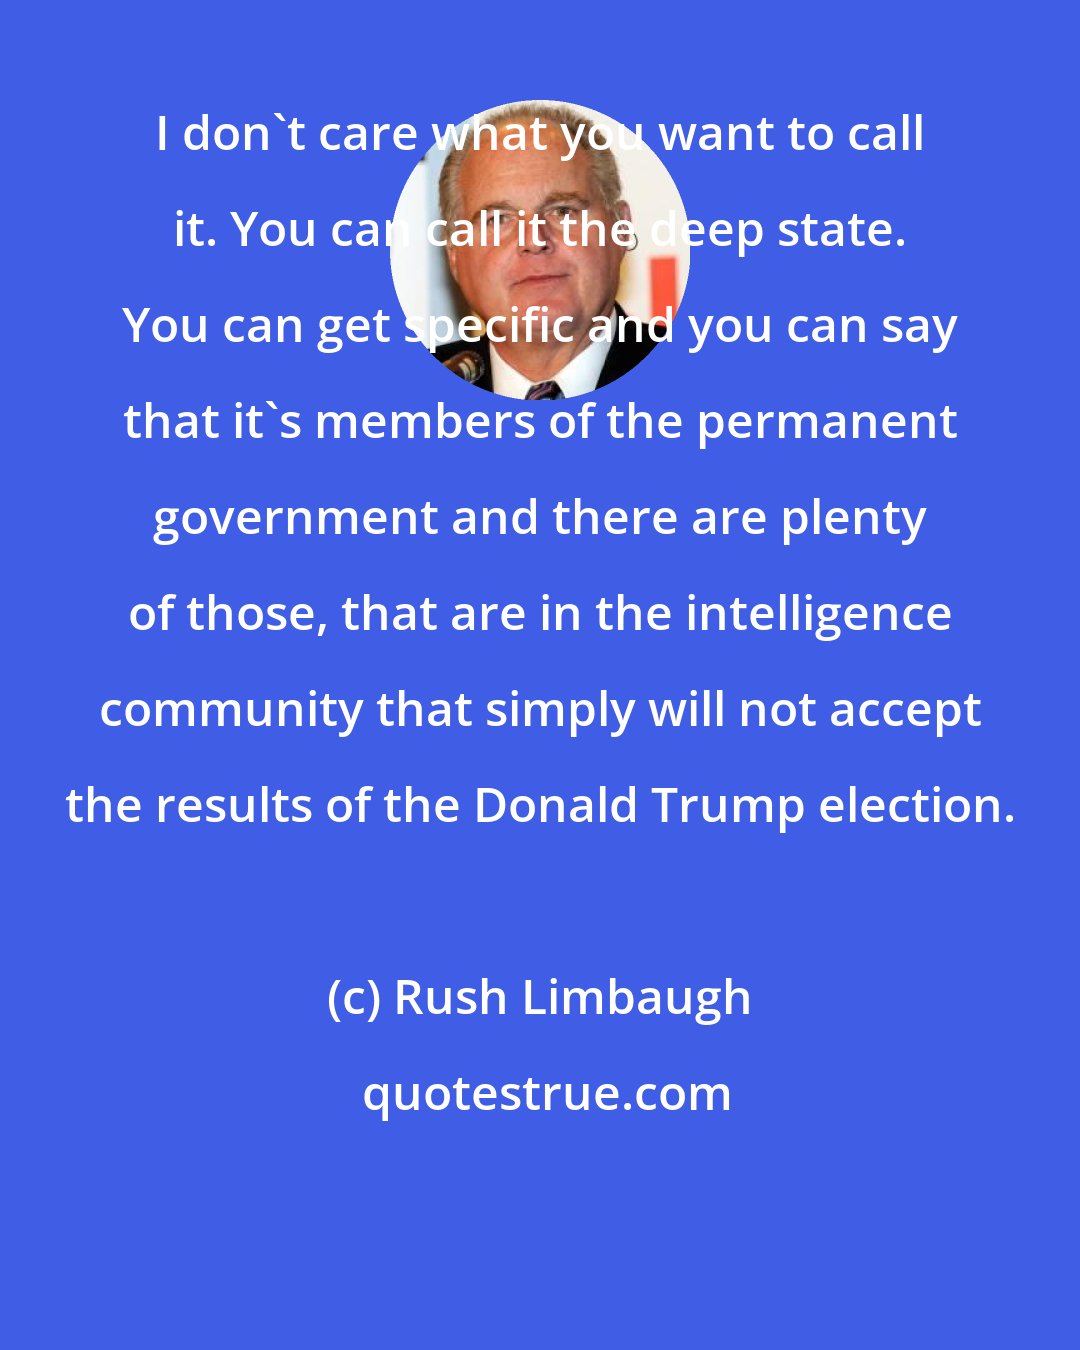 Rush Limbaugh: I don't care what you want to call it. You can call it the deep state. You can get specific and you can say that it's members of the permanent government and there are plenty of those, that are in the intelligence community that simply will not accept the results of the Donald Trump election.